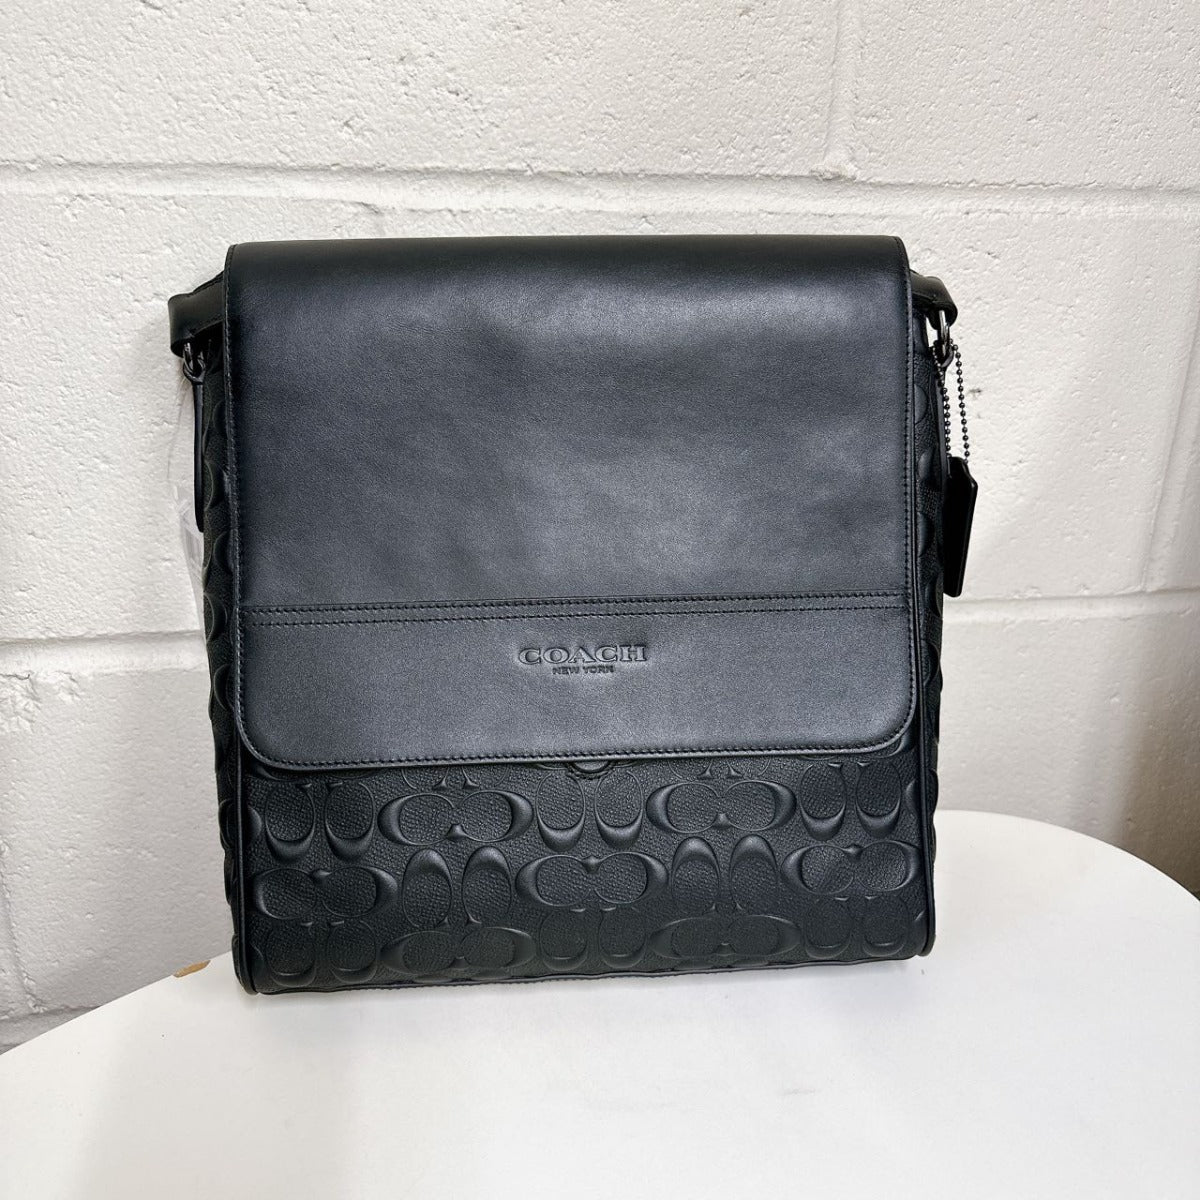 Coach 4006 Houston Map Bag In Signature Leather in Black